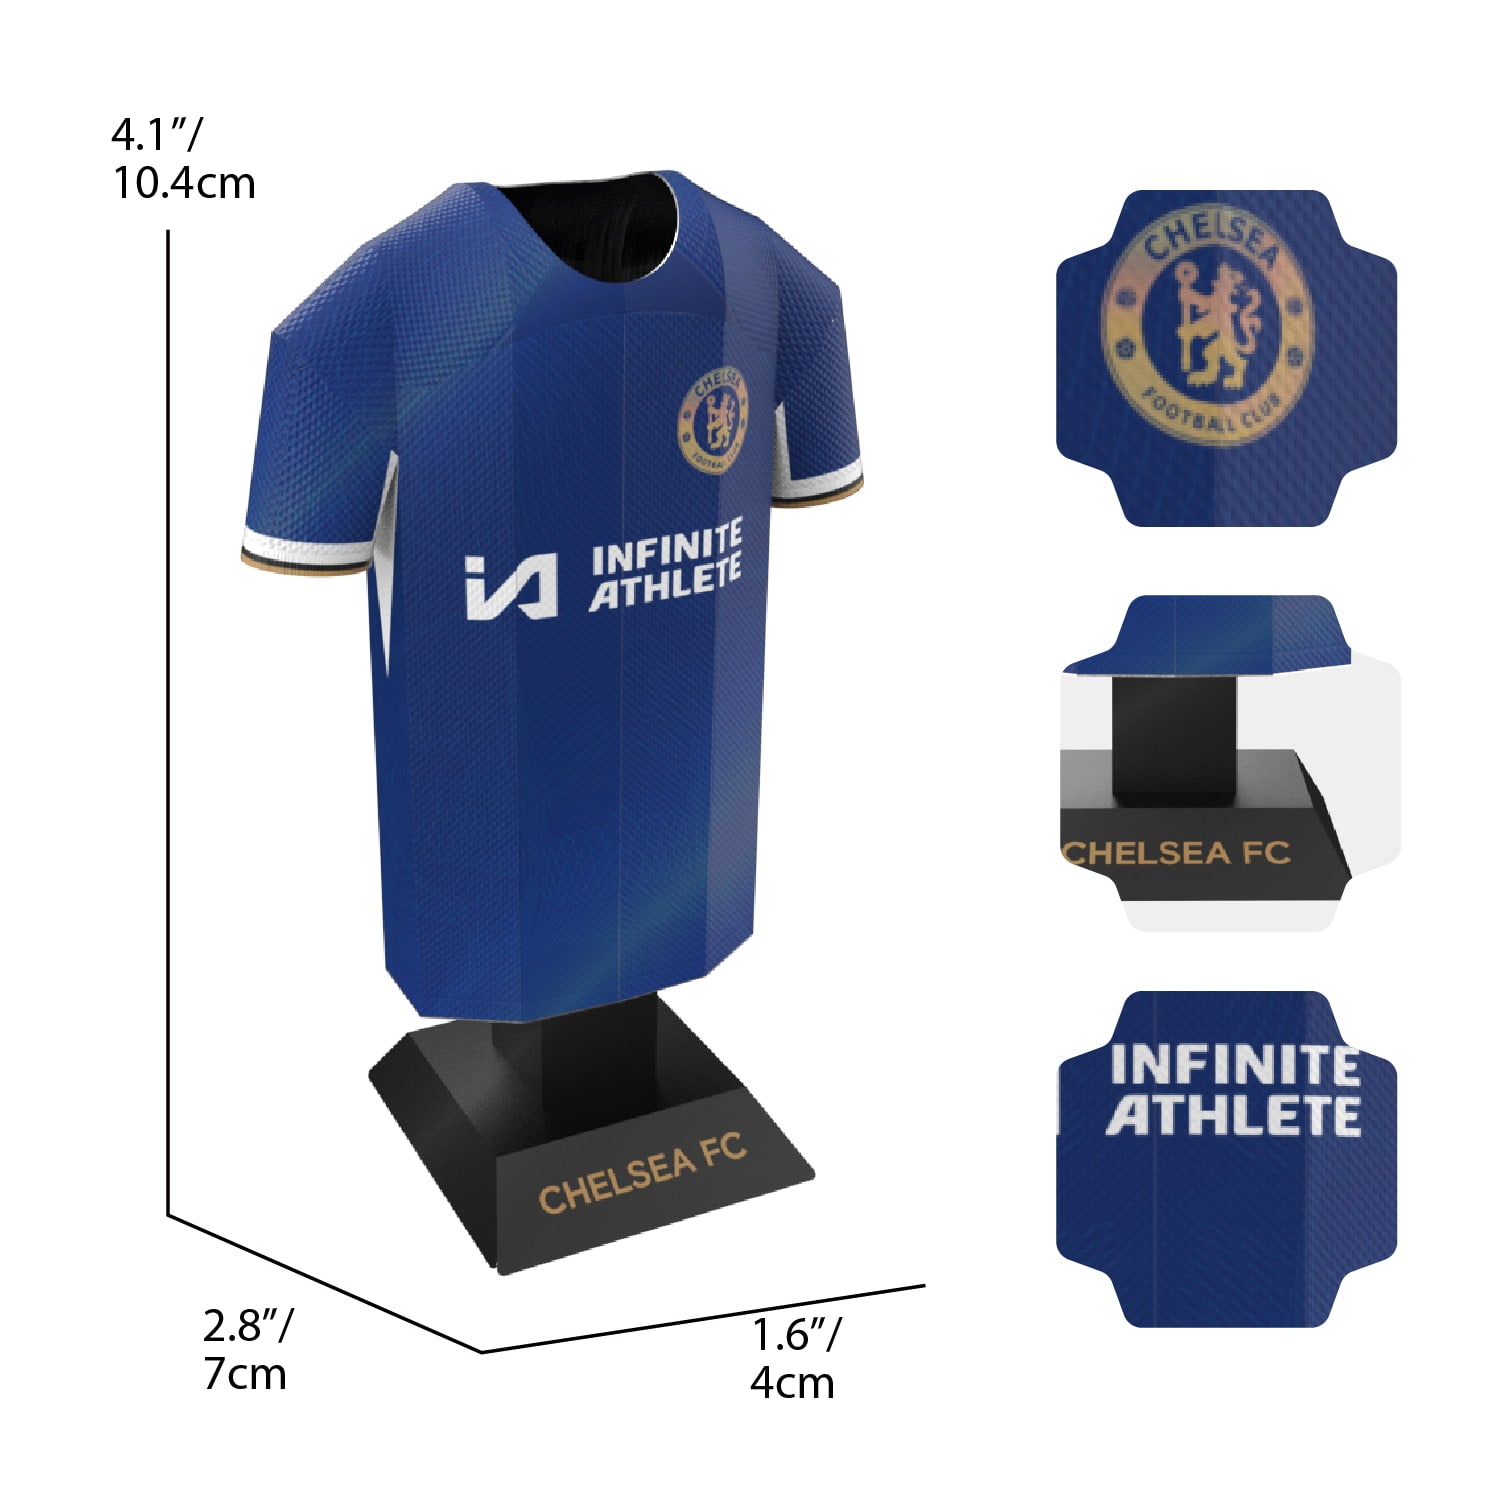 Chelsea home kit dimensions